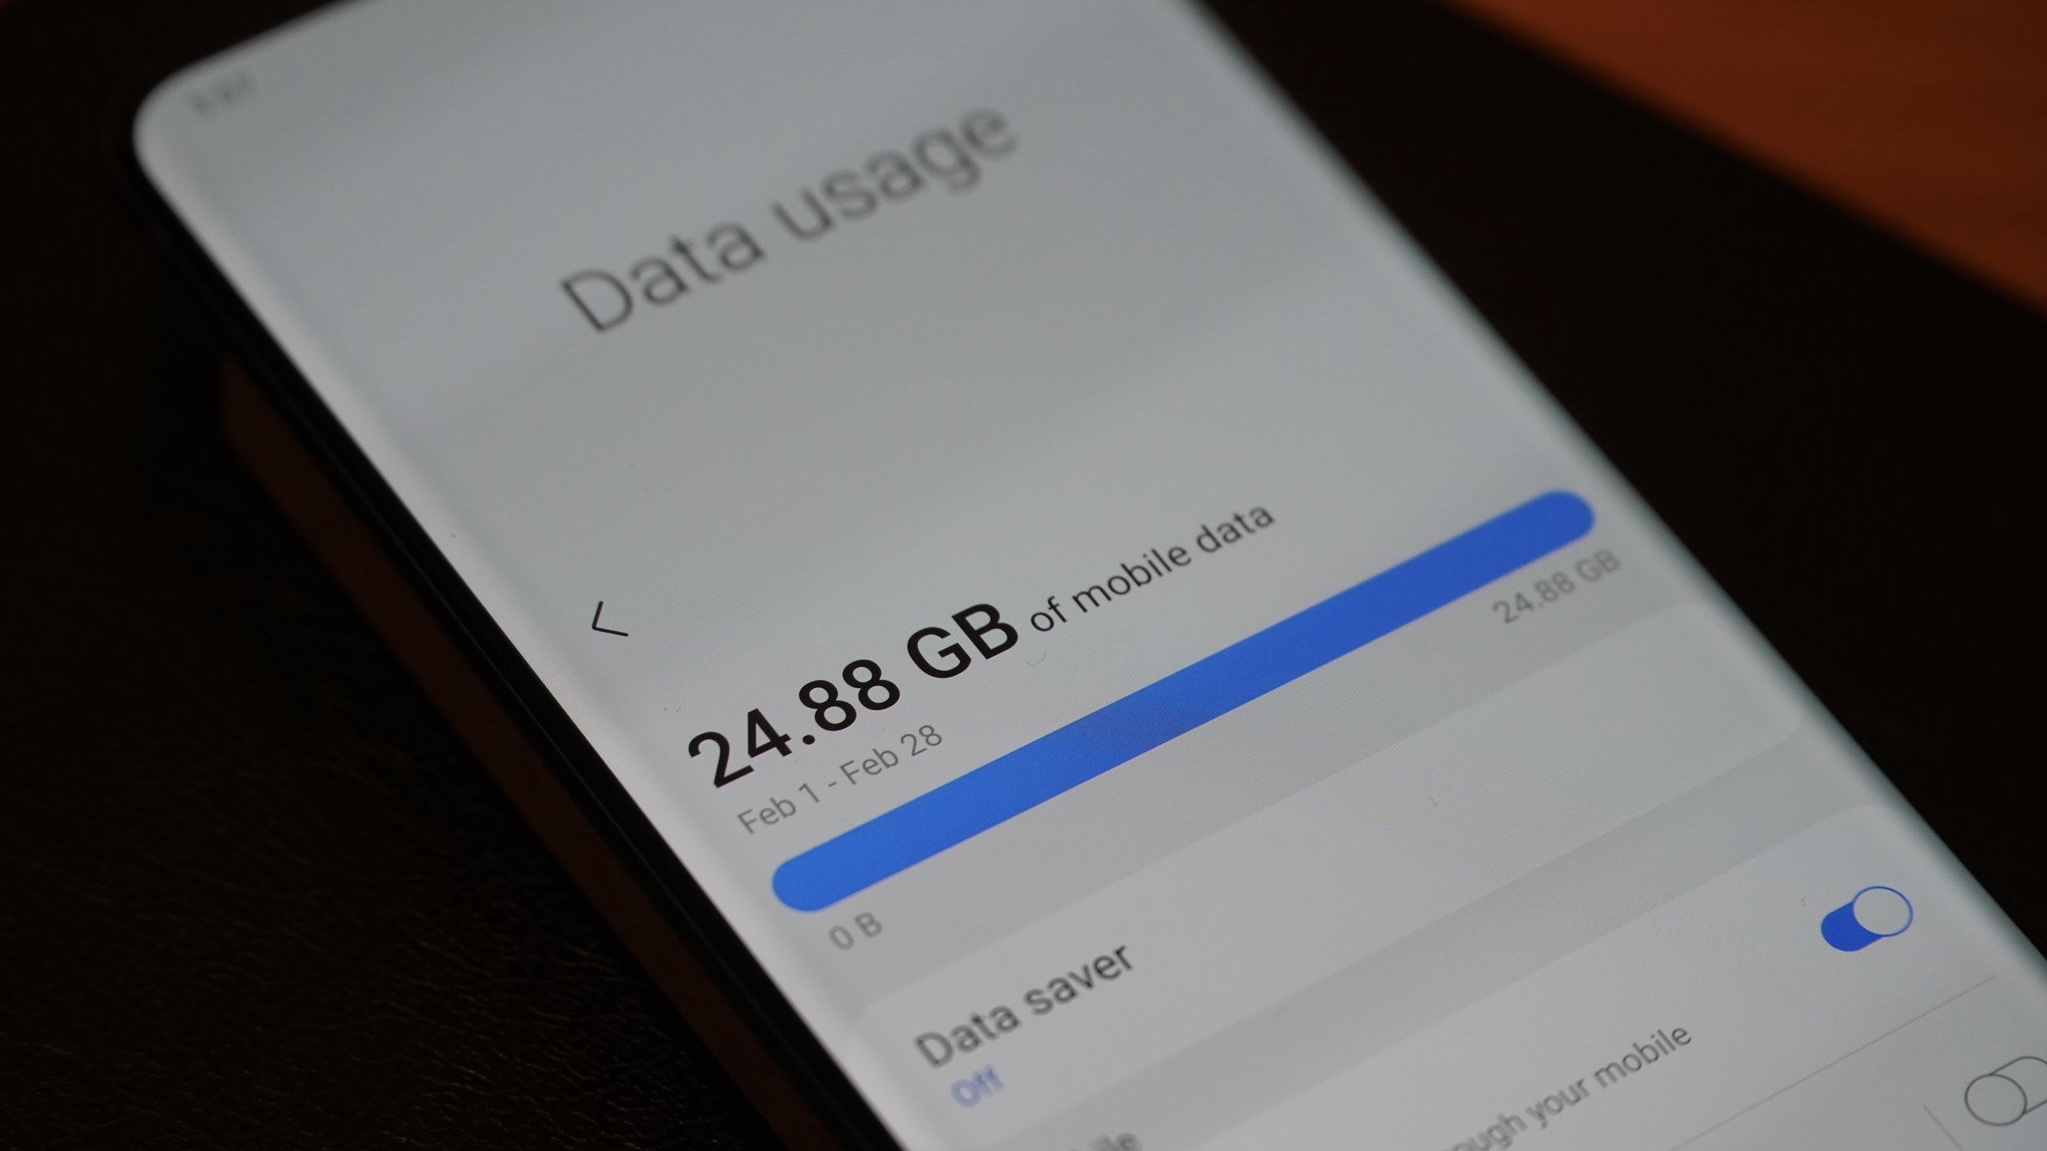 Data usage on Android